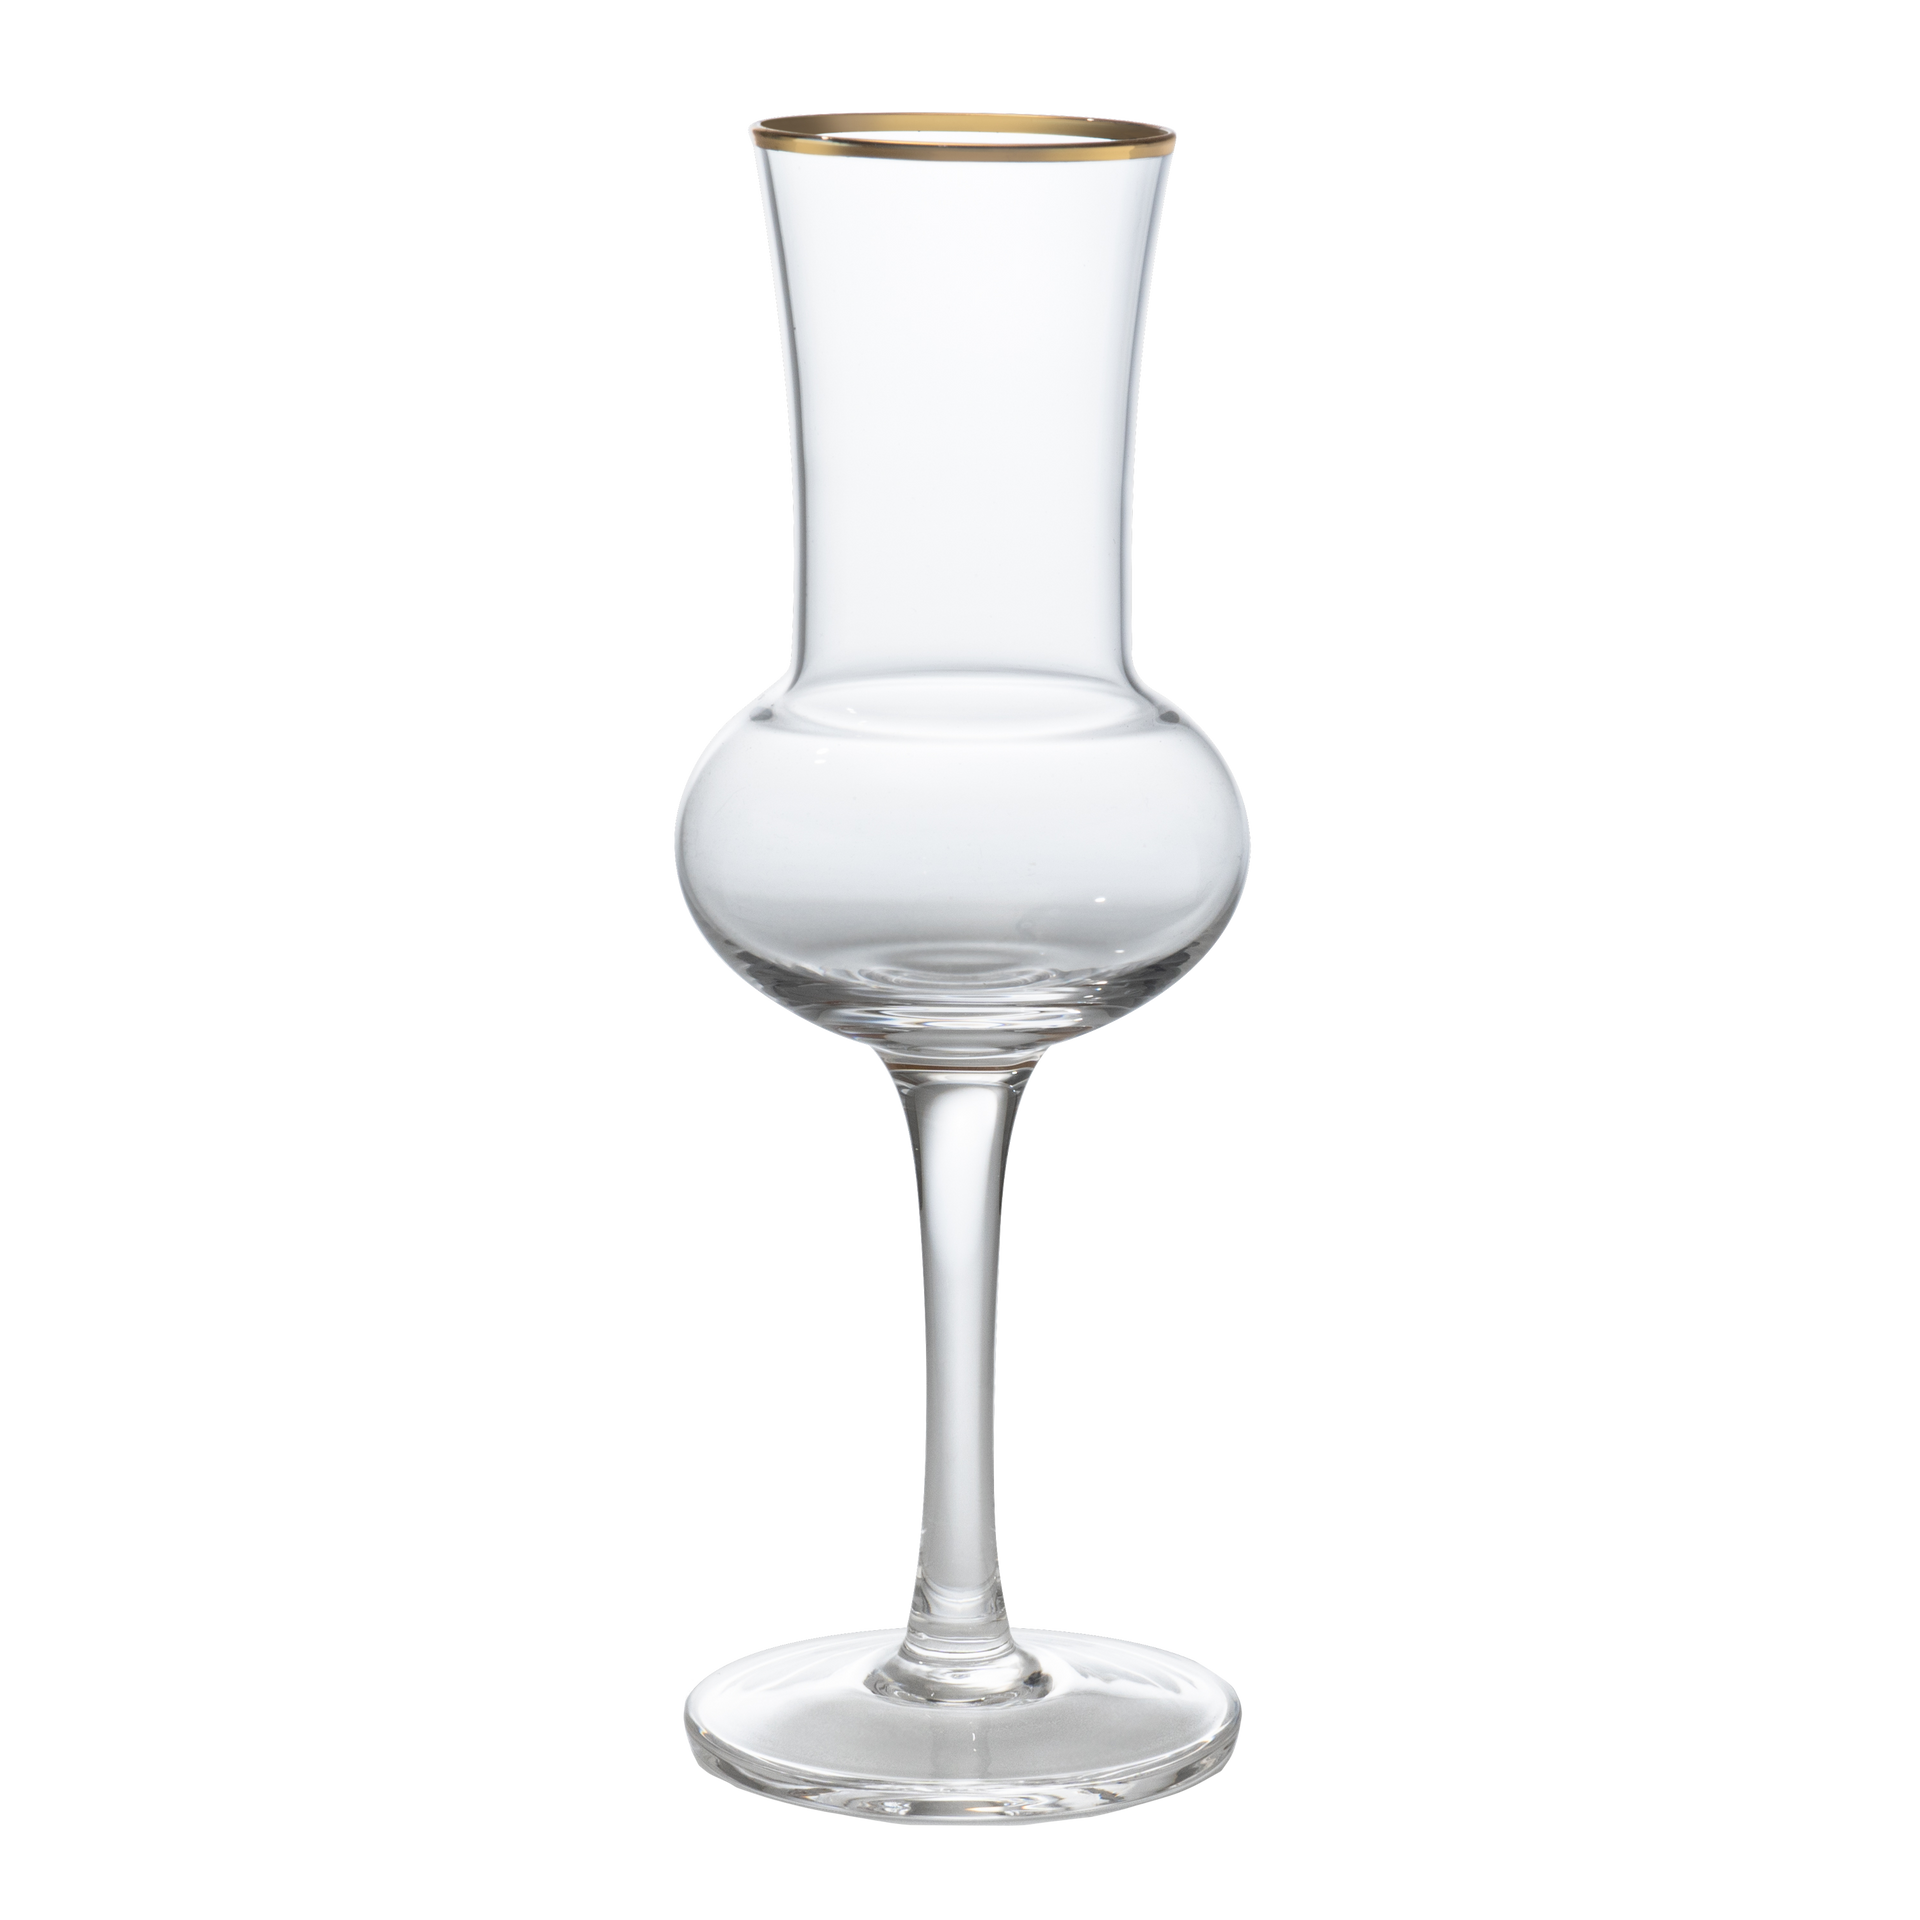 The Wine Savant Crystal Set of 6 Grappa Glasses 3oz Post  Dinner Drinks, Italian Tulip Shape, Tasting Glasses, Perfect For Nosing and  Sipping, Glasses for Absinthe, Aperol, Sherry, Aperitif, Scotch